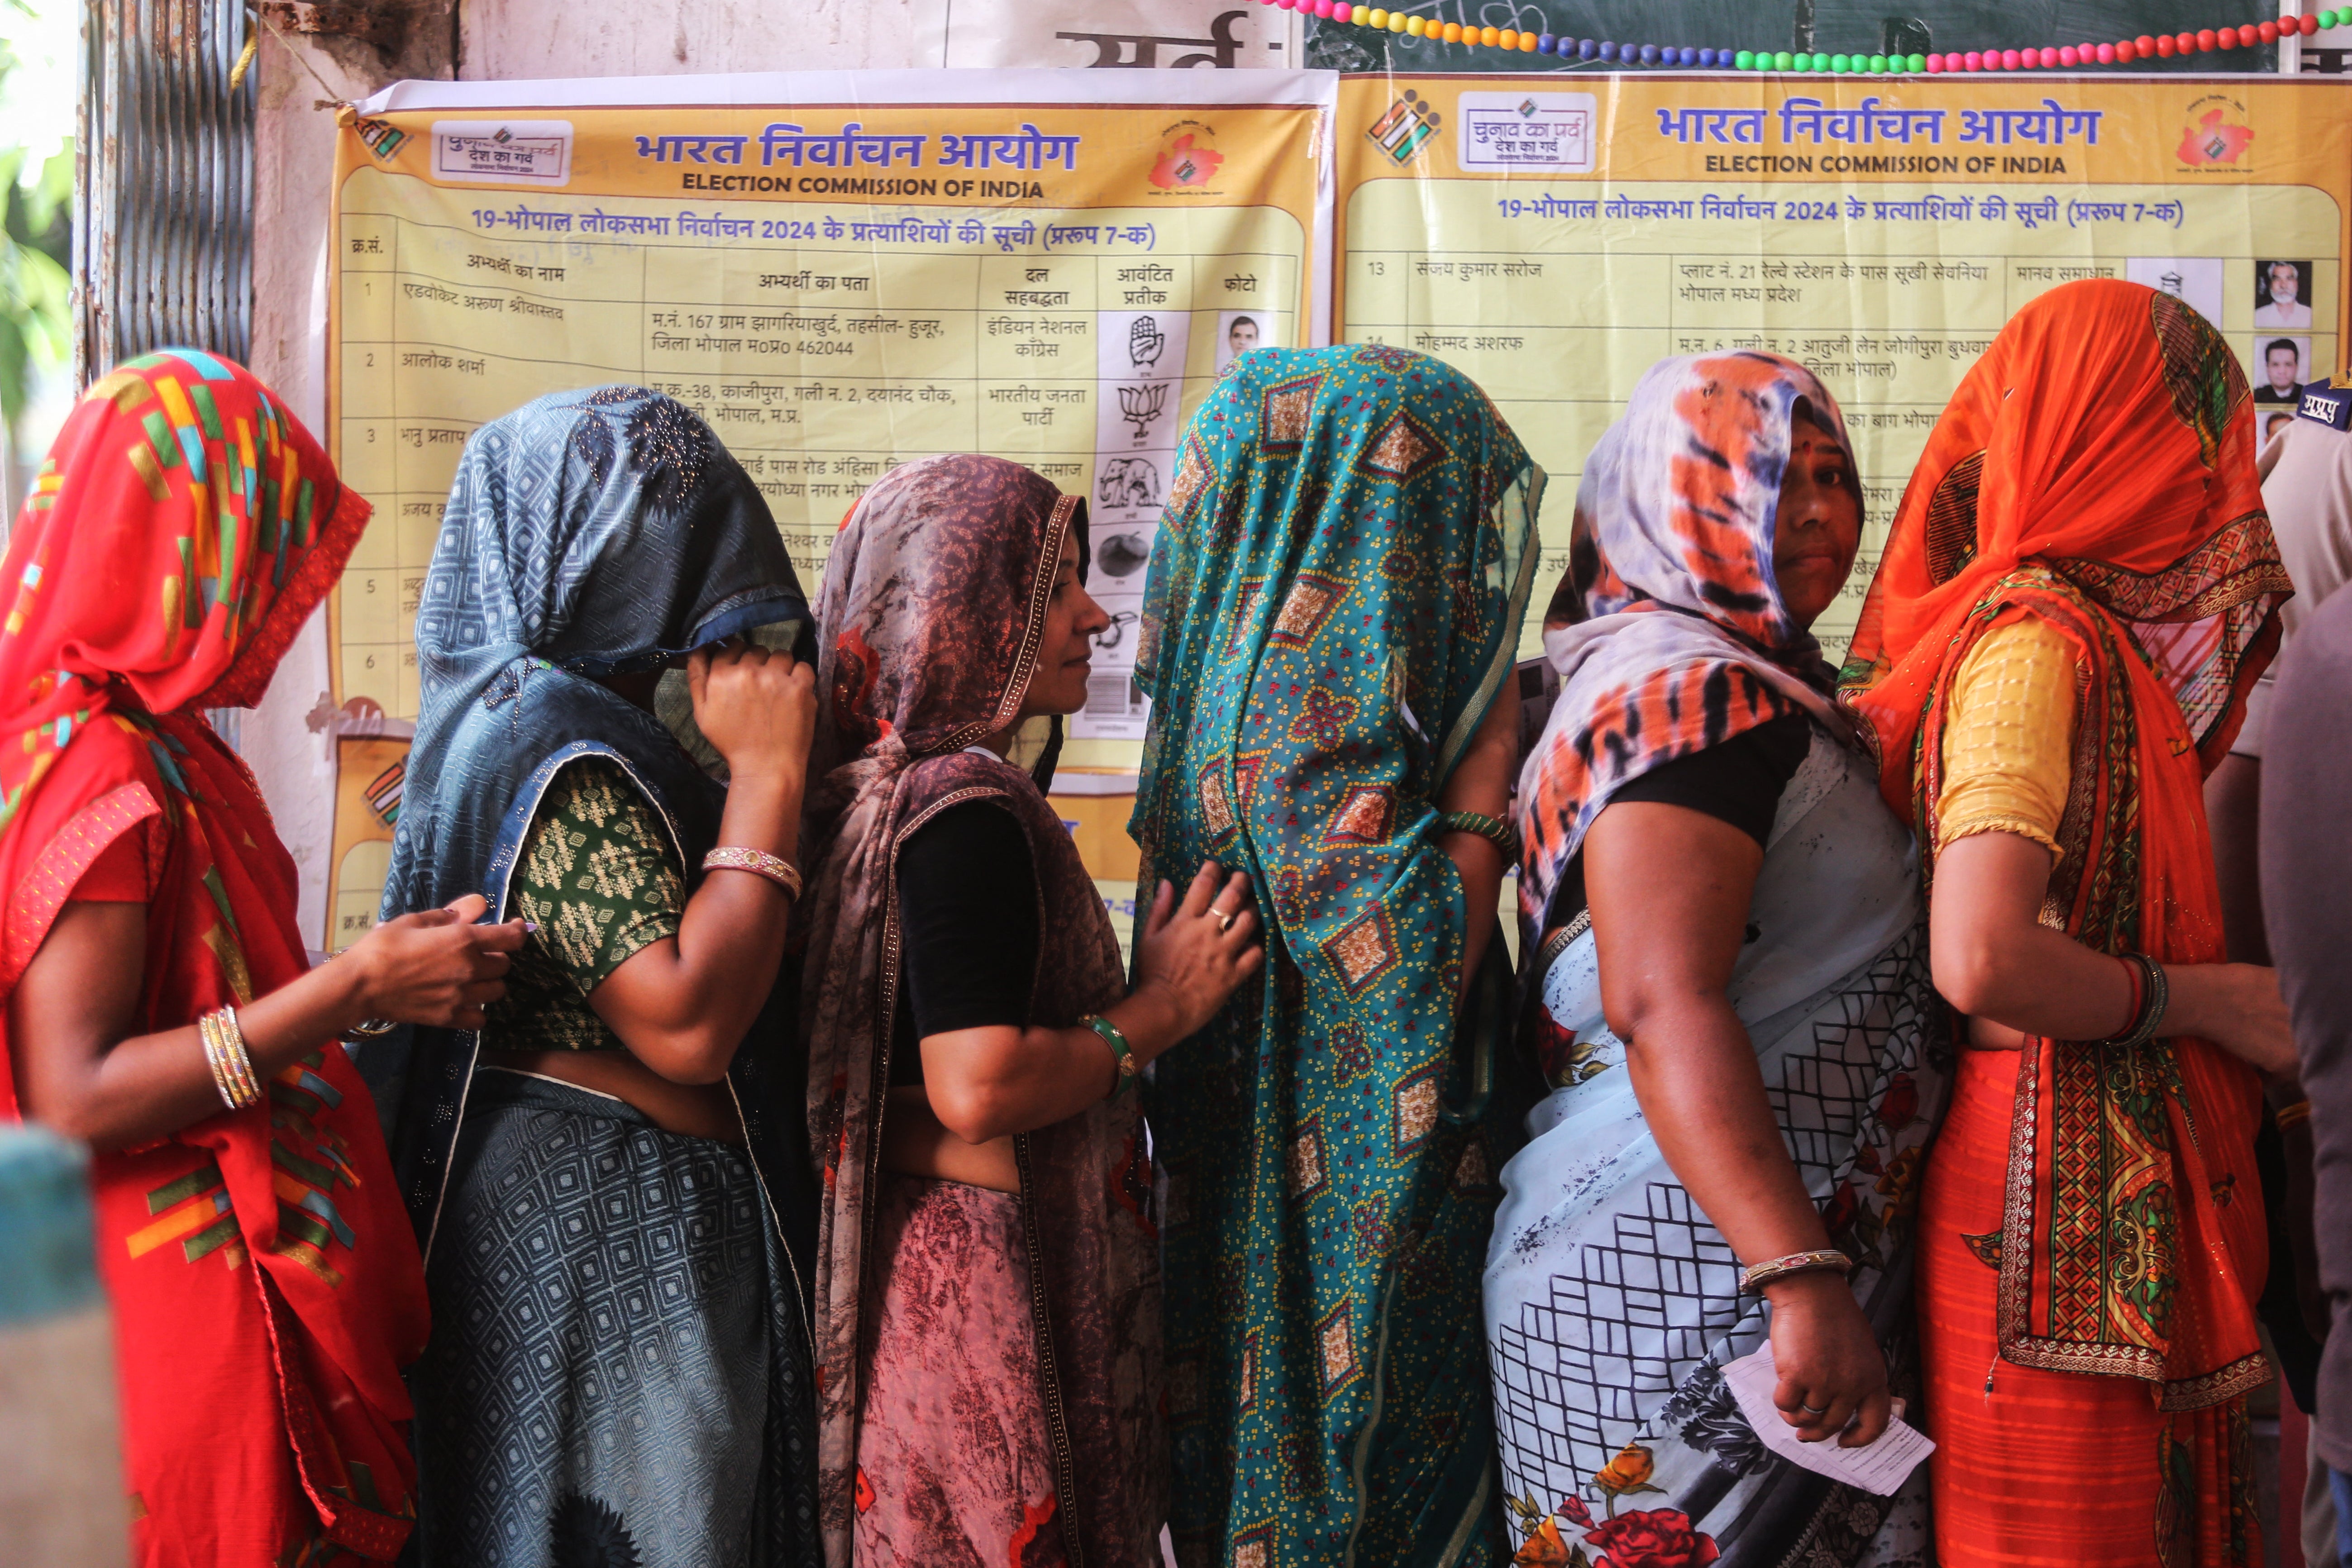 Indians stand in a queue to cast their ballots at a polling station during the third phase of polling in India's general election in Bhopal